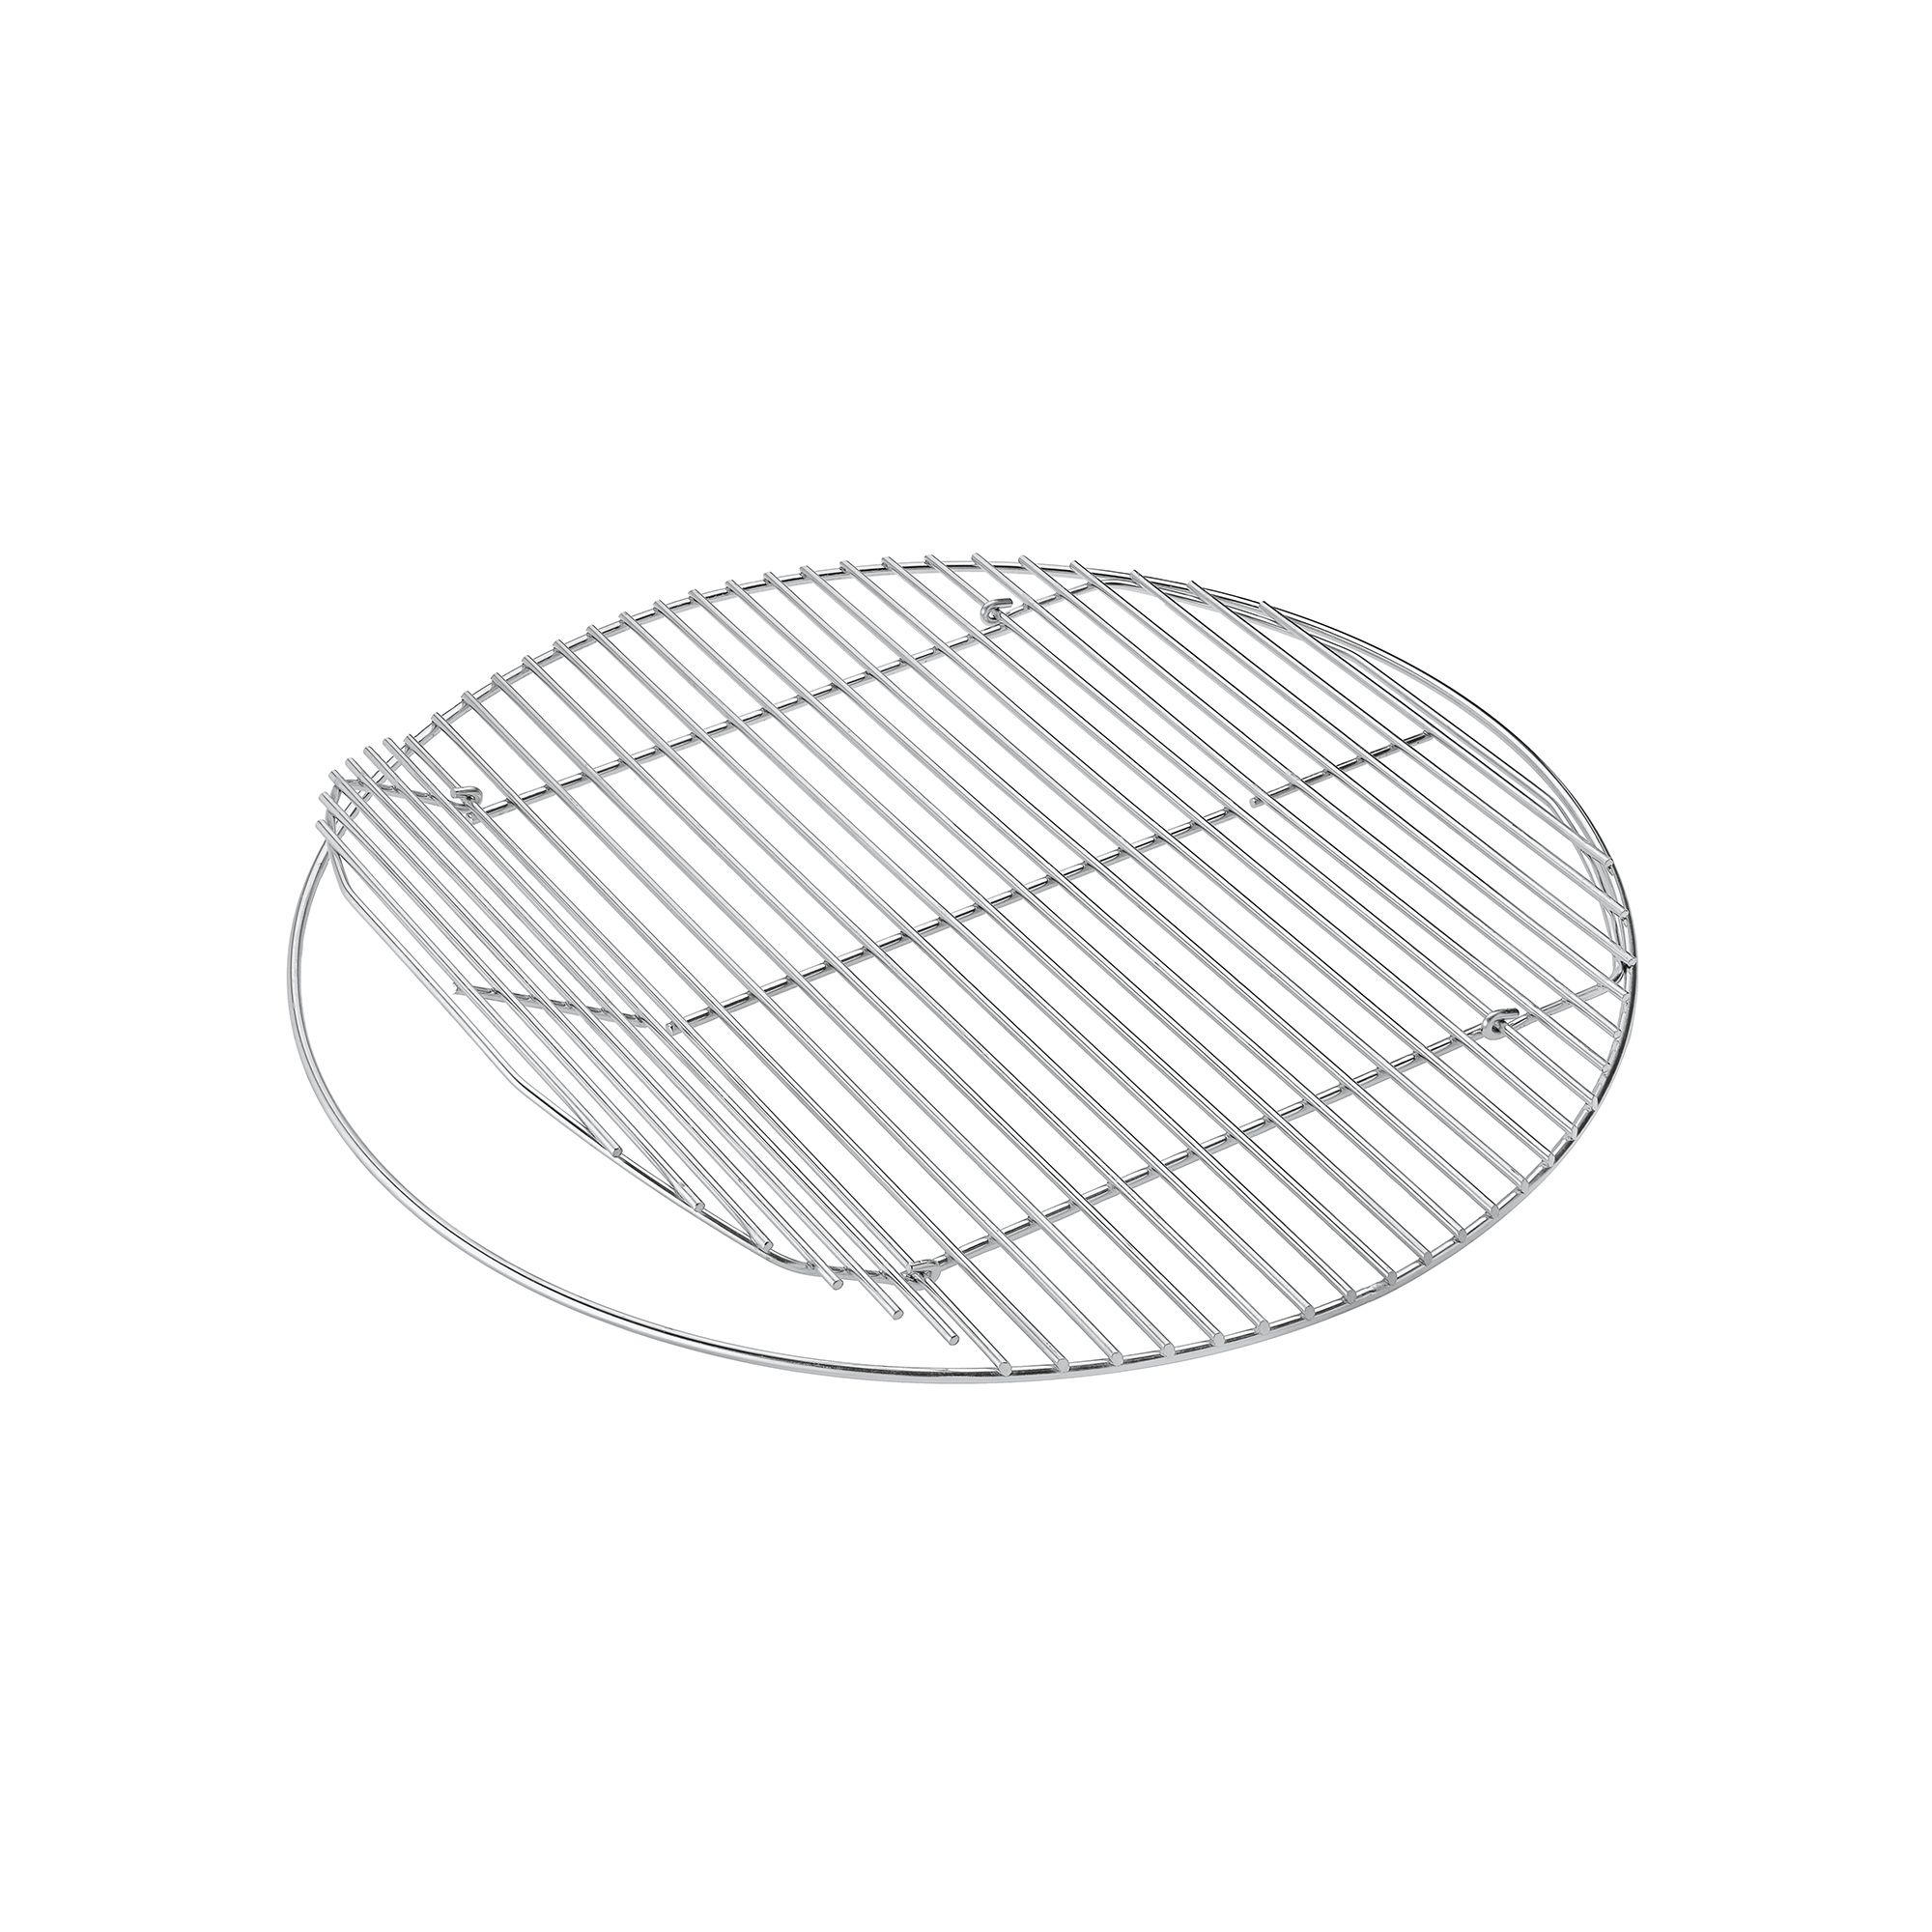 Grilling Grate Sport F50 stainless steel 20 in.